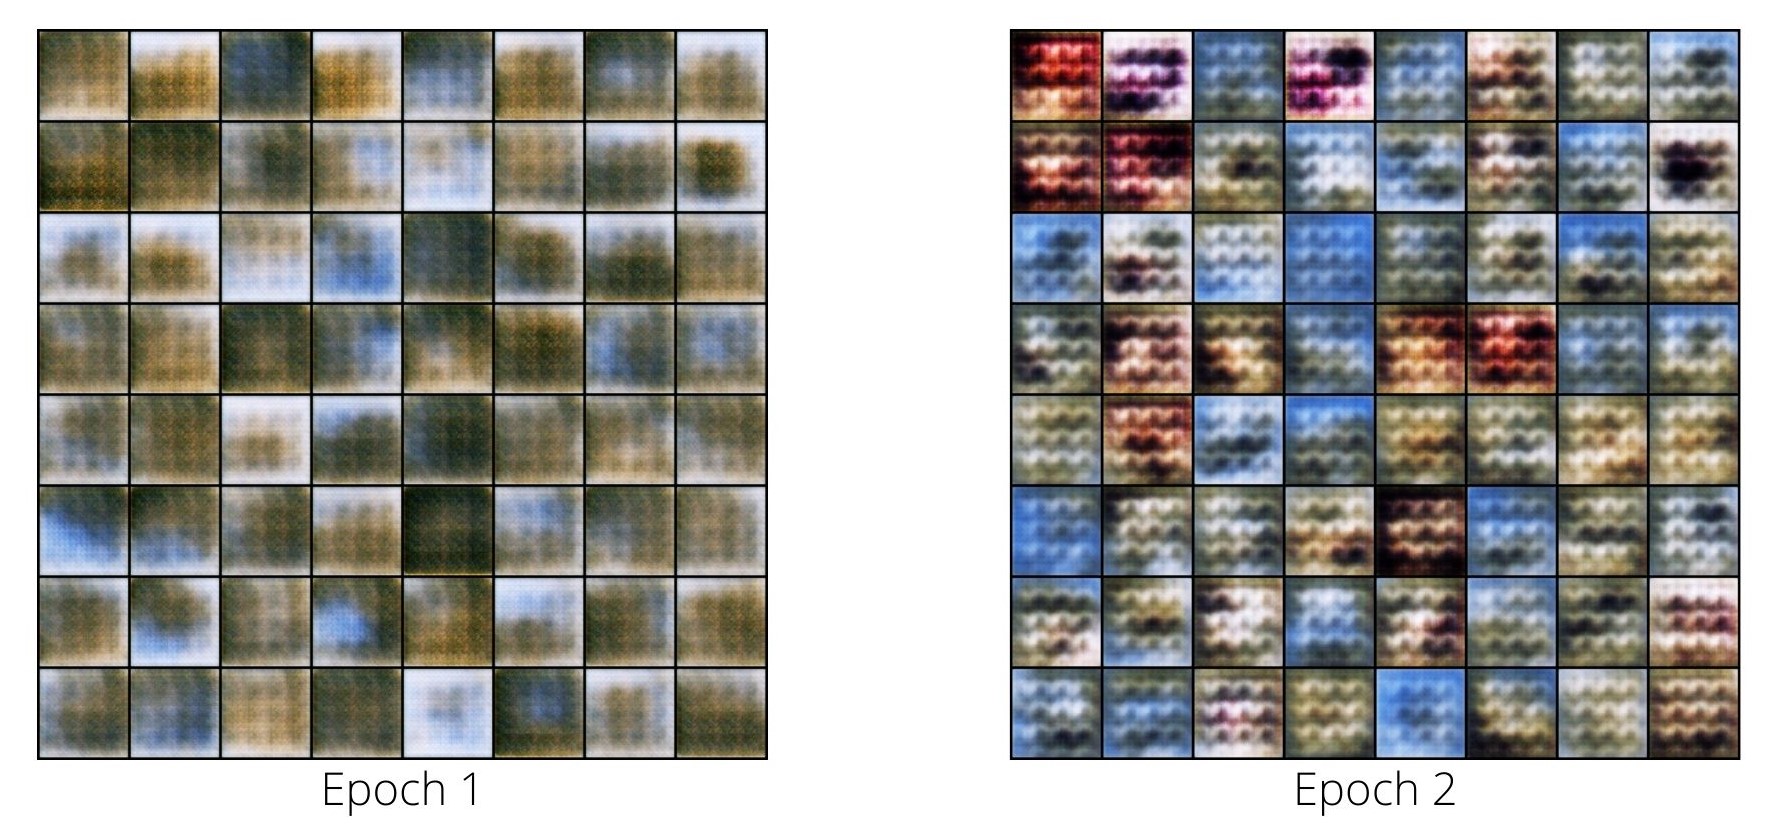 Images generated by the generator network after epoch 1 and epoch 2.